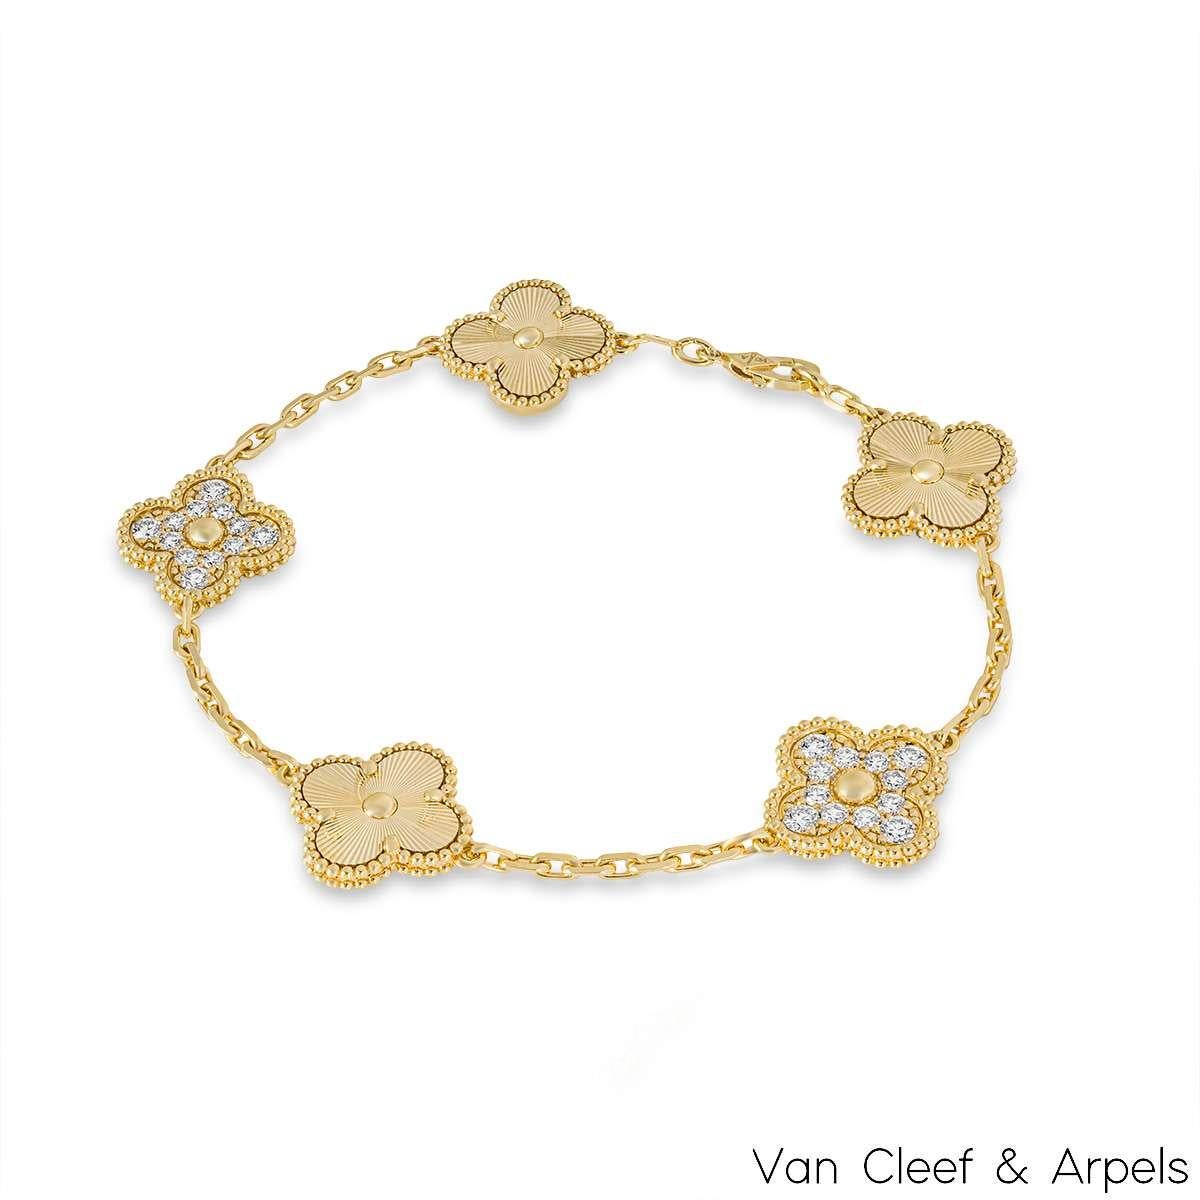 A spectacular 18k yellow gold diamond guilloche bracelet from the Vintage Alhambra collection by Van Cleef and Arpels. The bracelet is made up of 5 alternating iconic clover motifs, three feature guilloche patterns and two feature diamond set